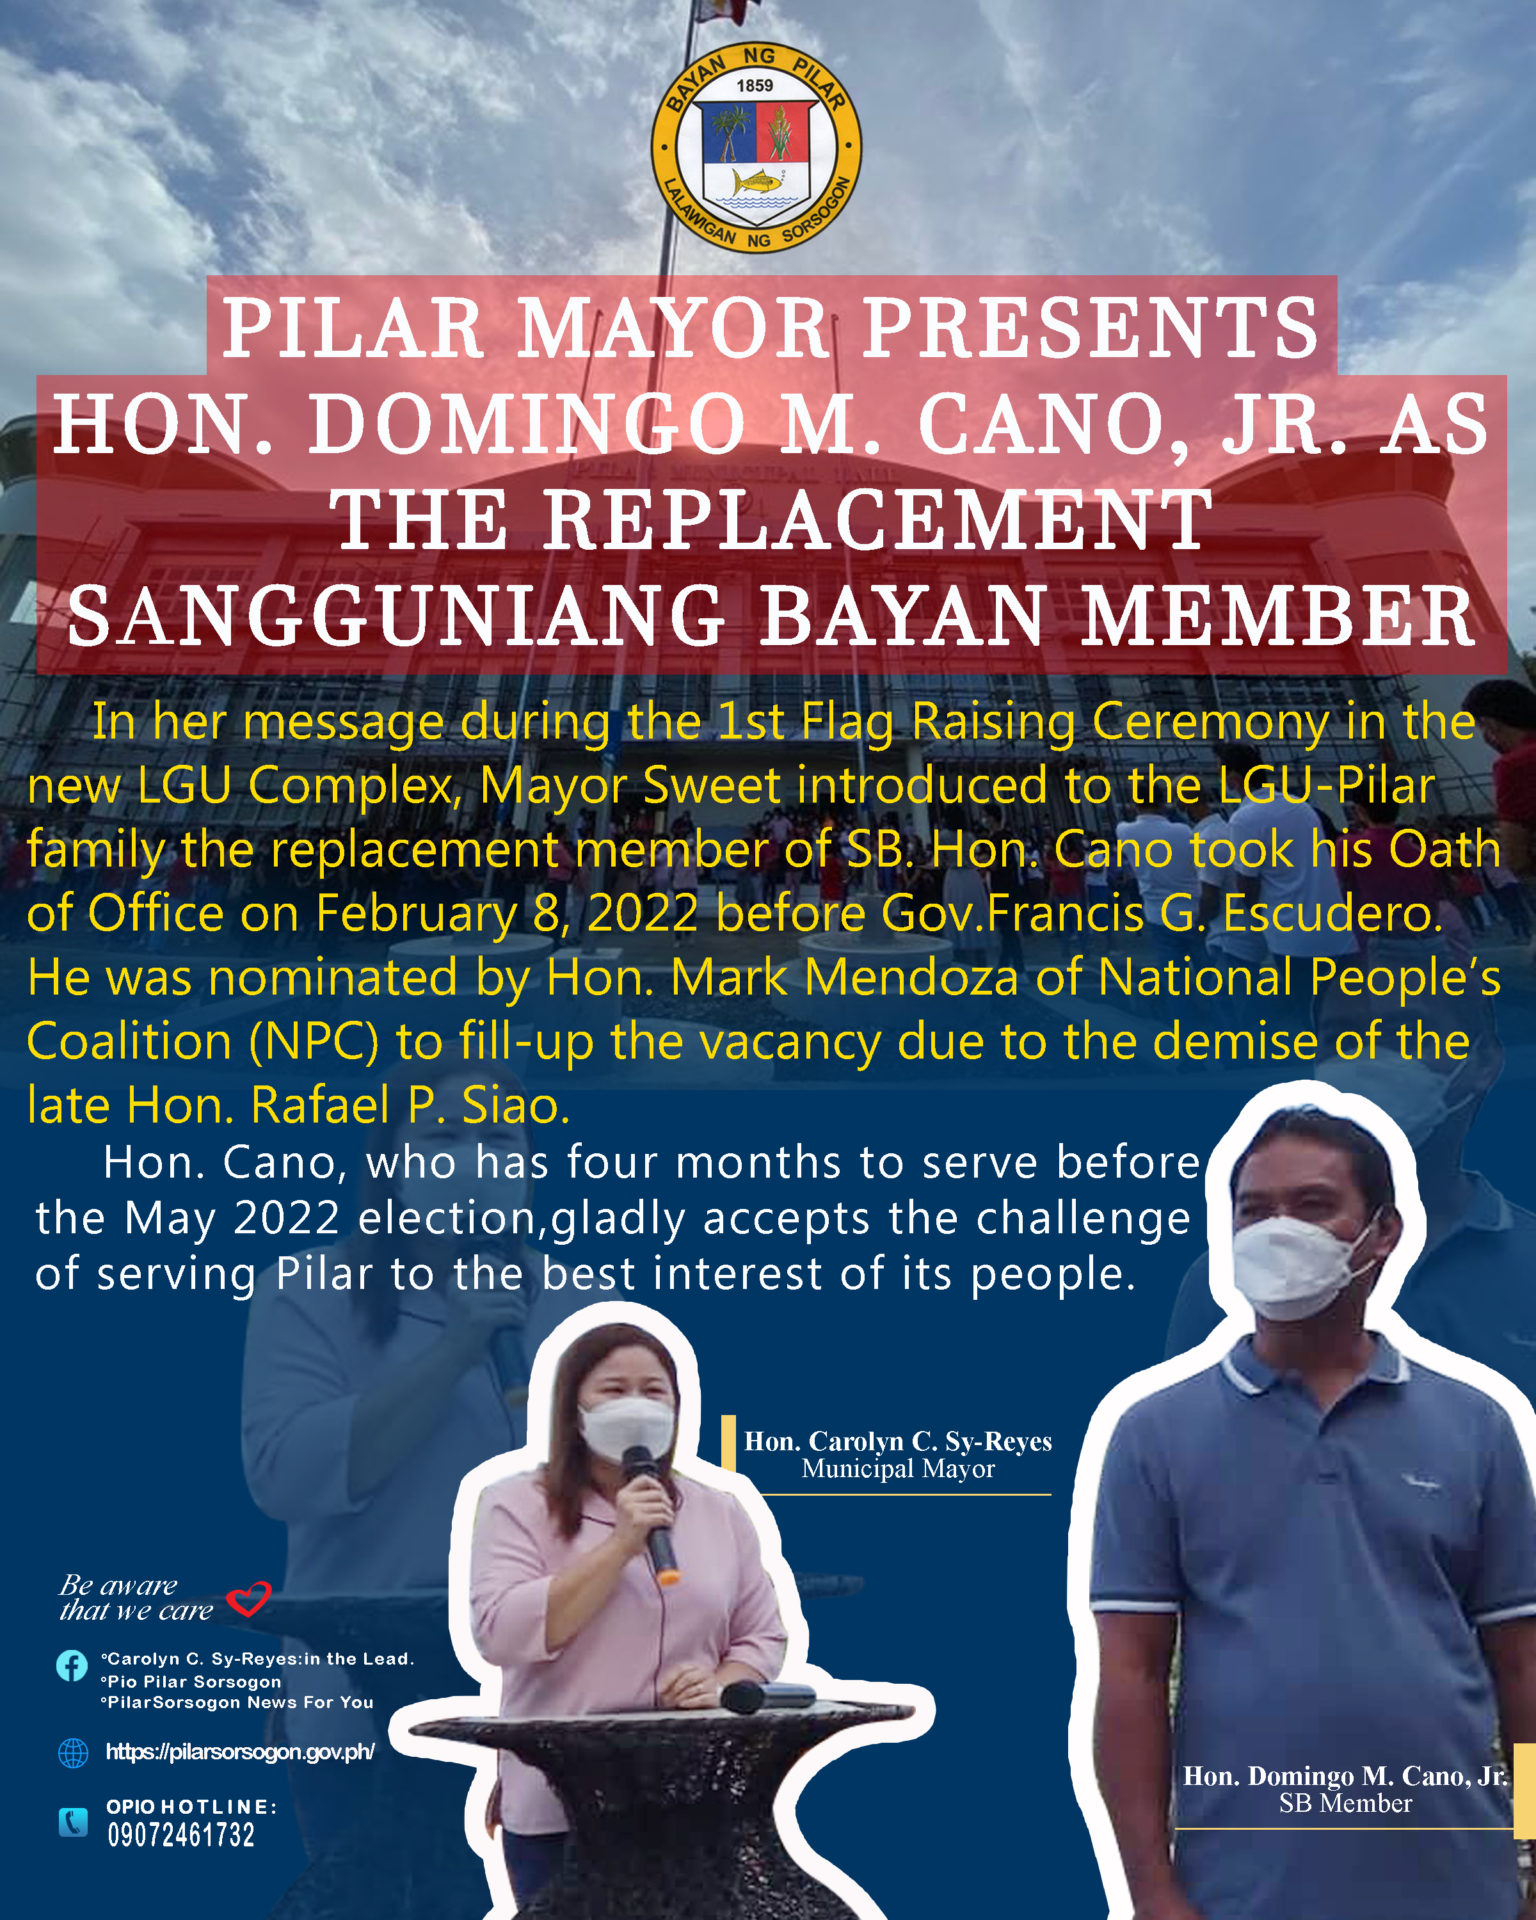 There’s something new and someone new for the Municipality of Pilar this February 14, 2022.